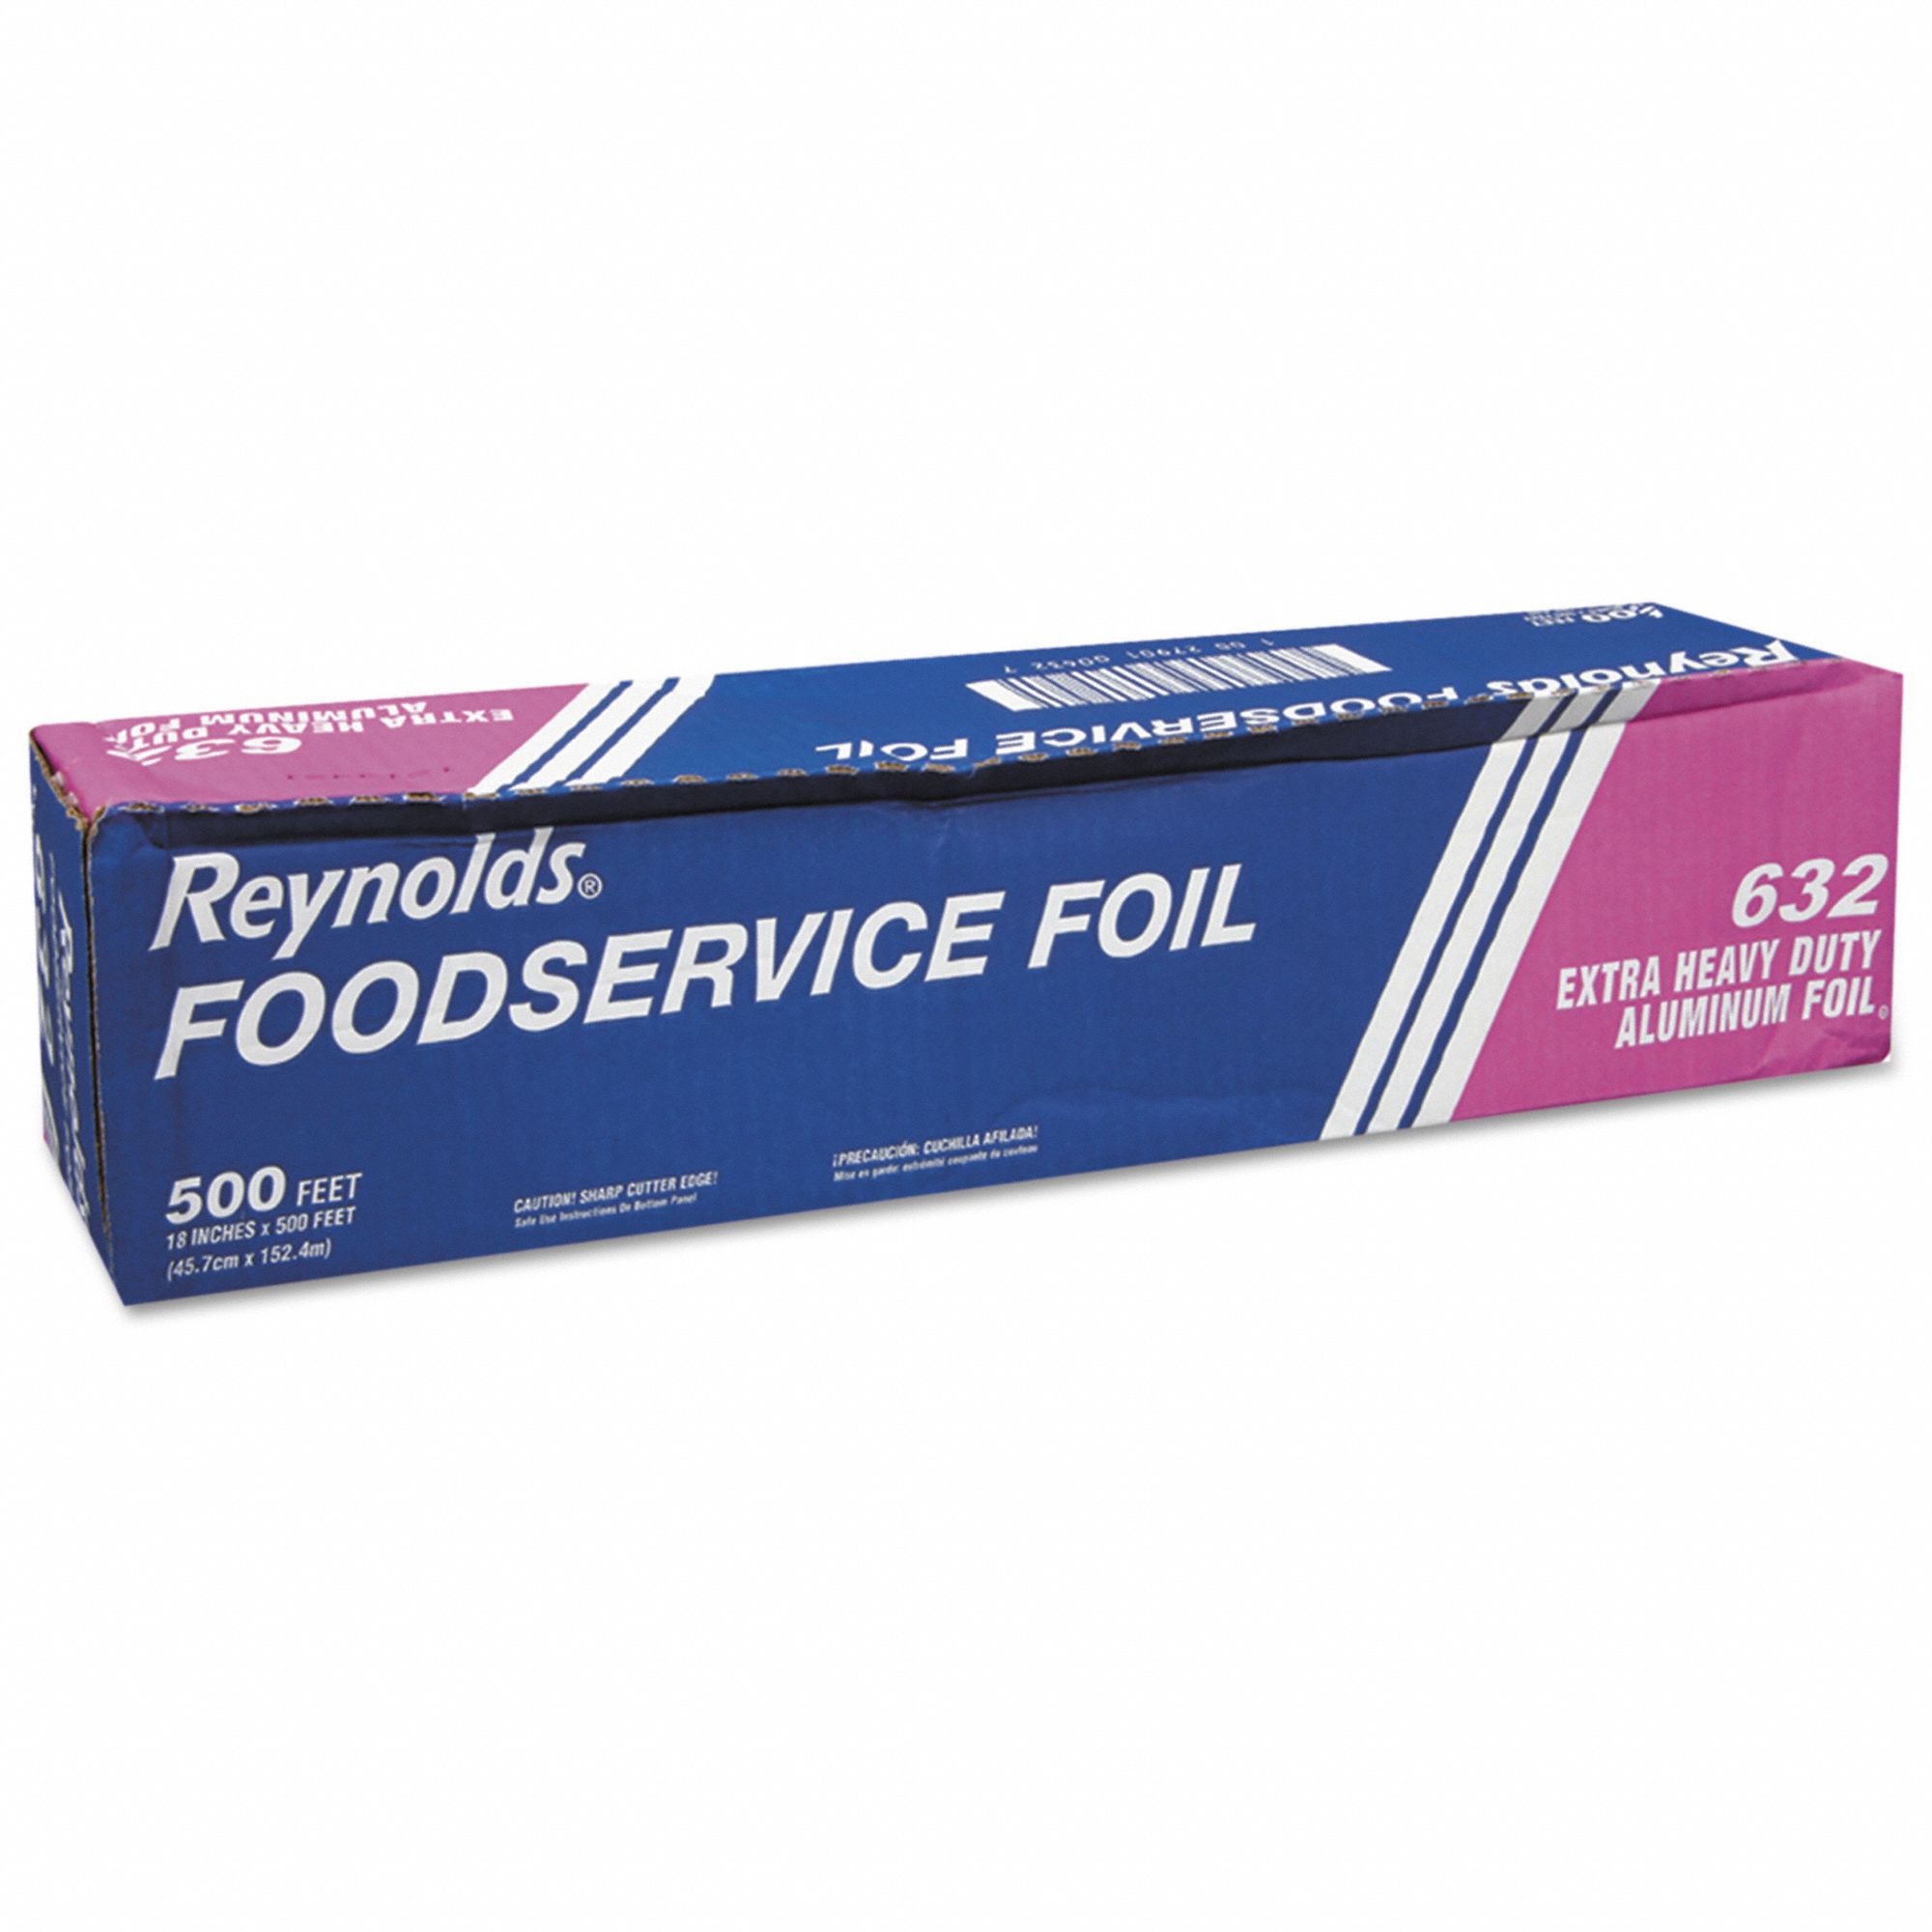 APPROVED VENDOR Aluminum Foil Roll: Heavy-Wt, 500 ft Roll Lg, No Fold, 18  in Sheet Wd